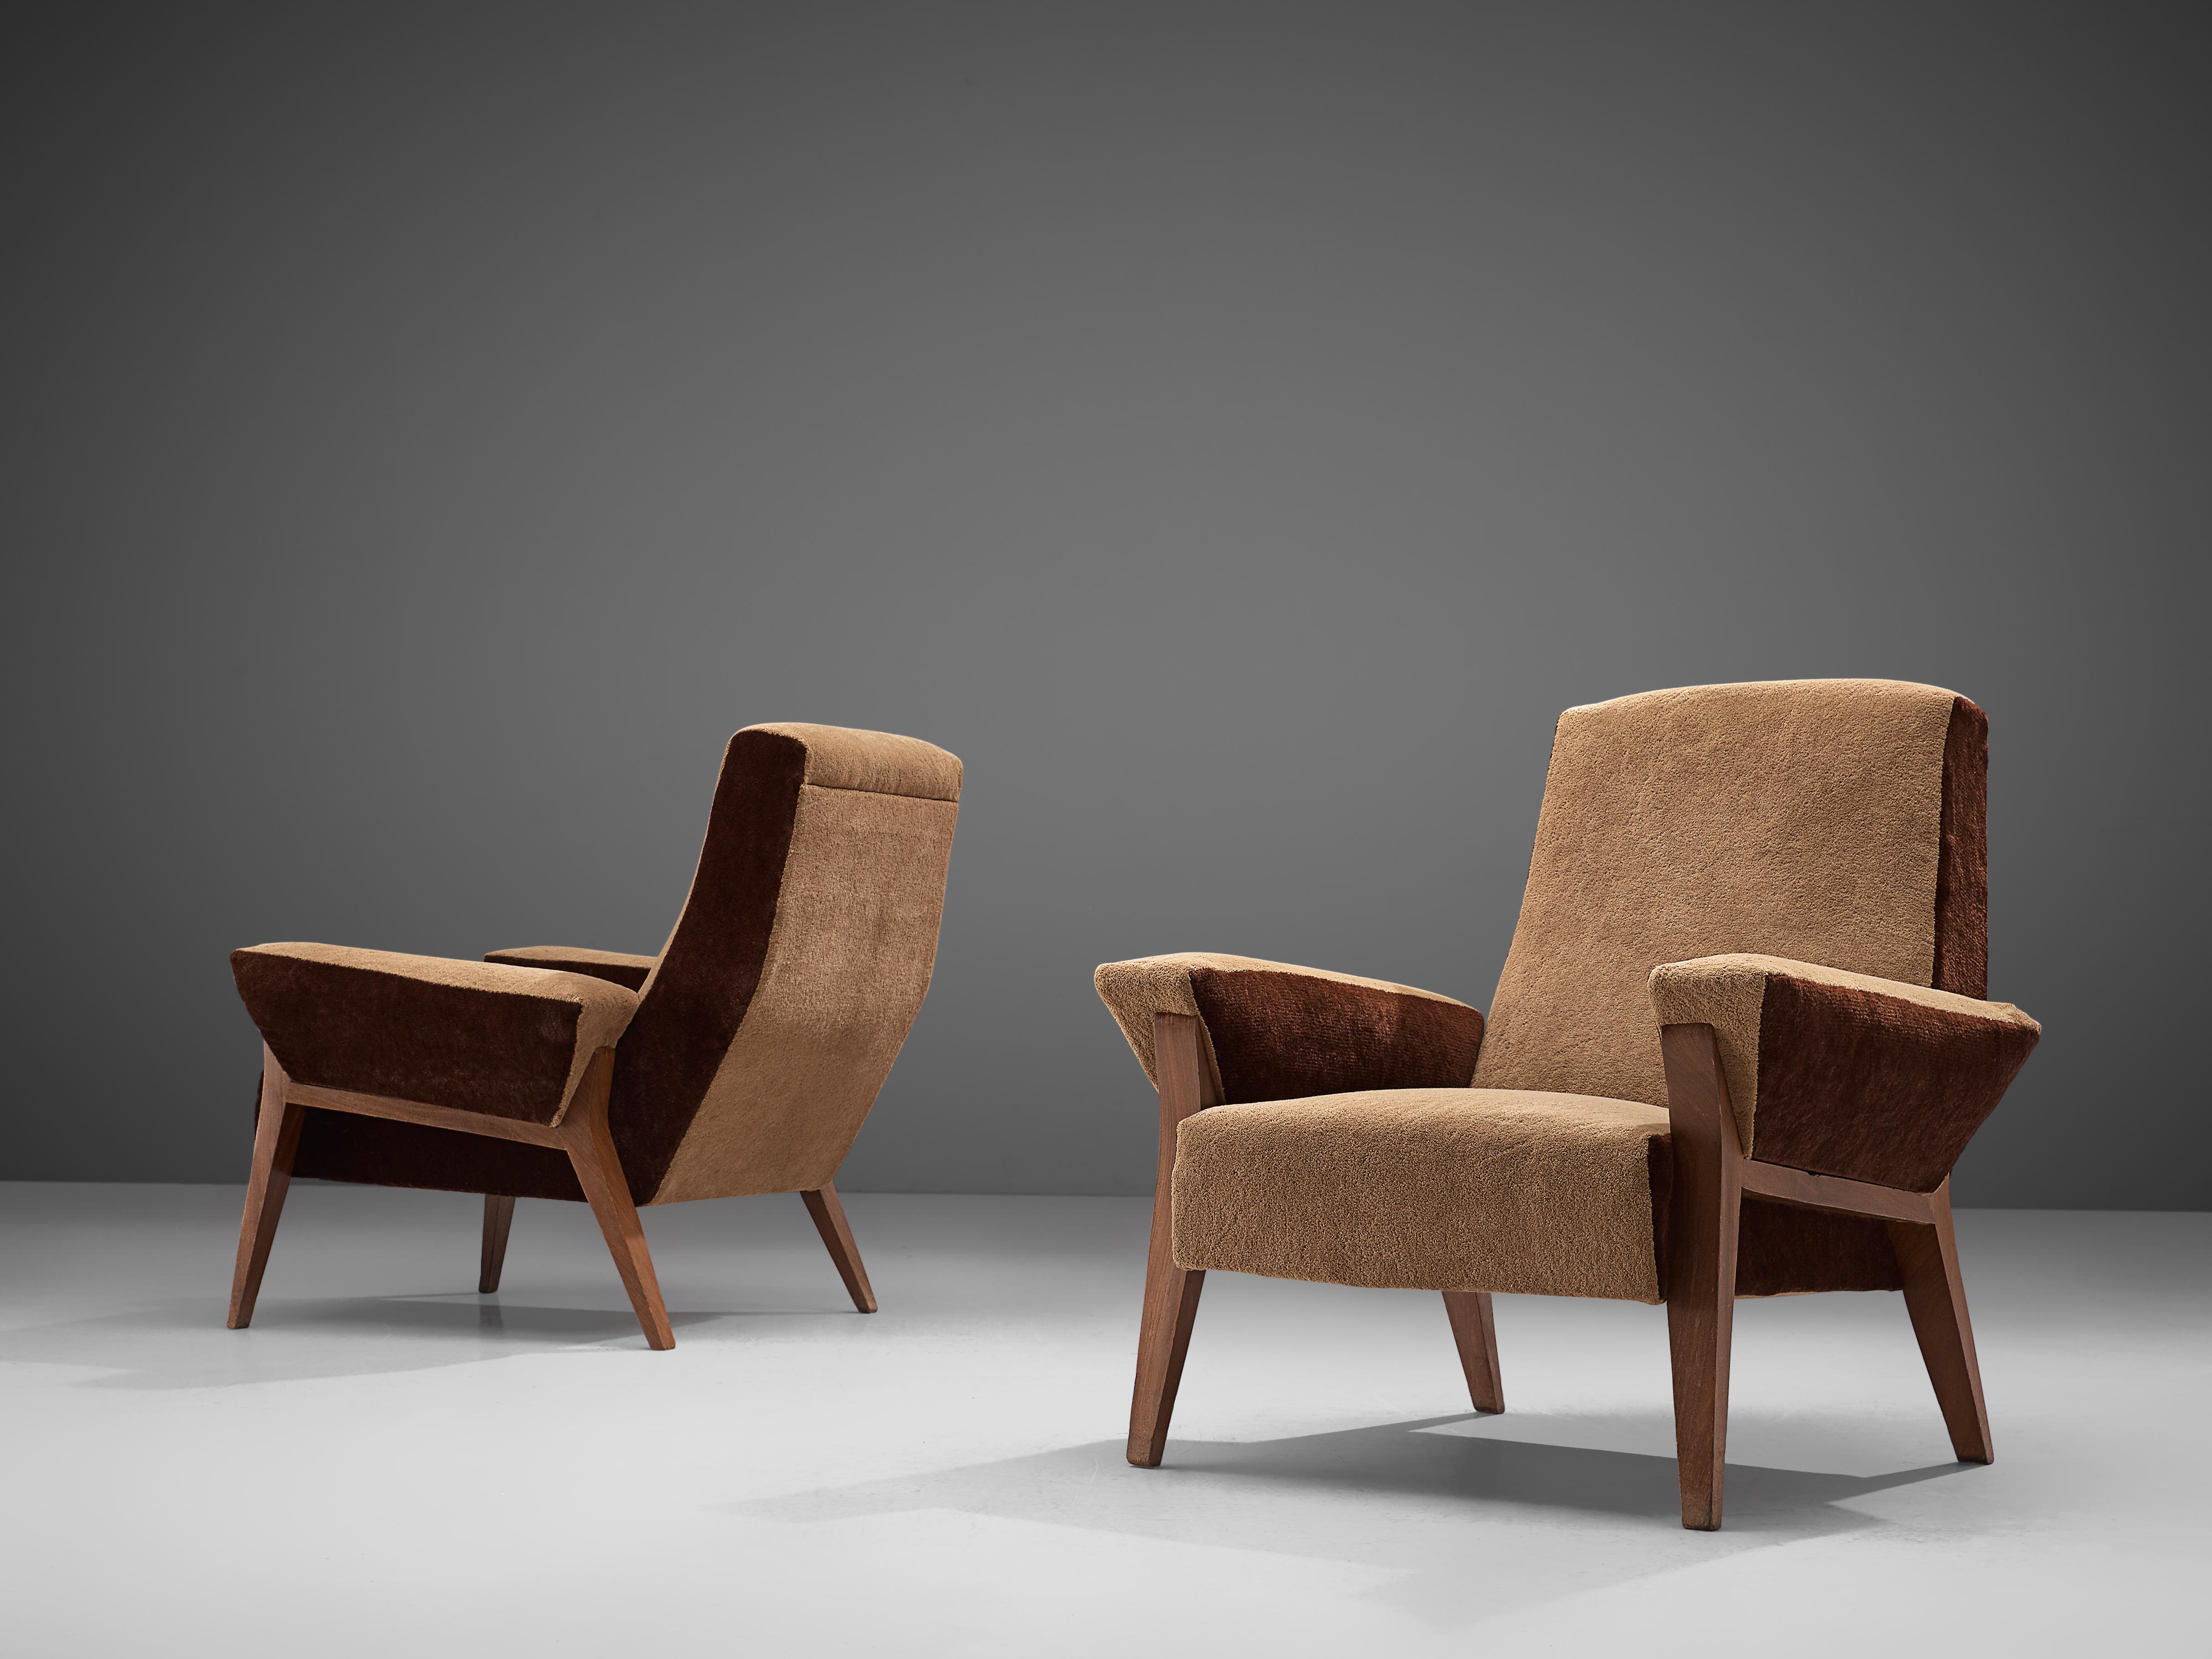 Pair of high back chairs, fabric and beech, Italy, 1950s

This set of chairs is beautiful example of Italian post-war design from the 1950s. The design is on the one hand simplistic with elegant shapes. On the other hand the set has straight lines